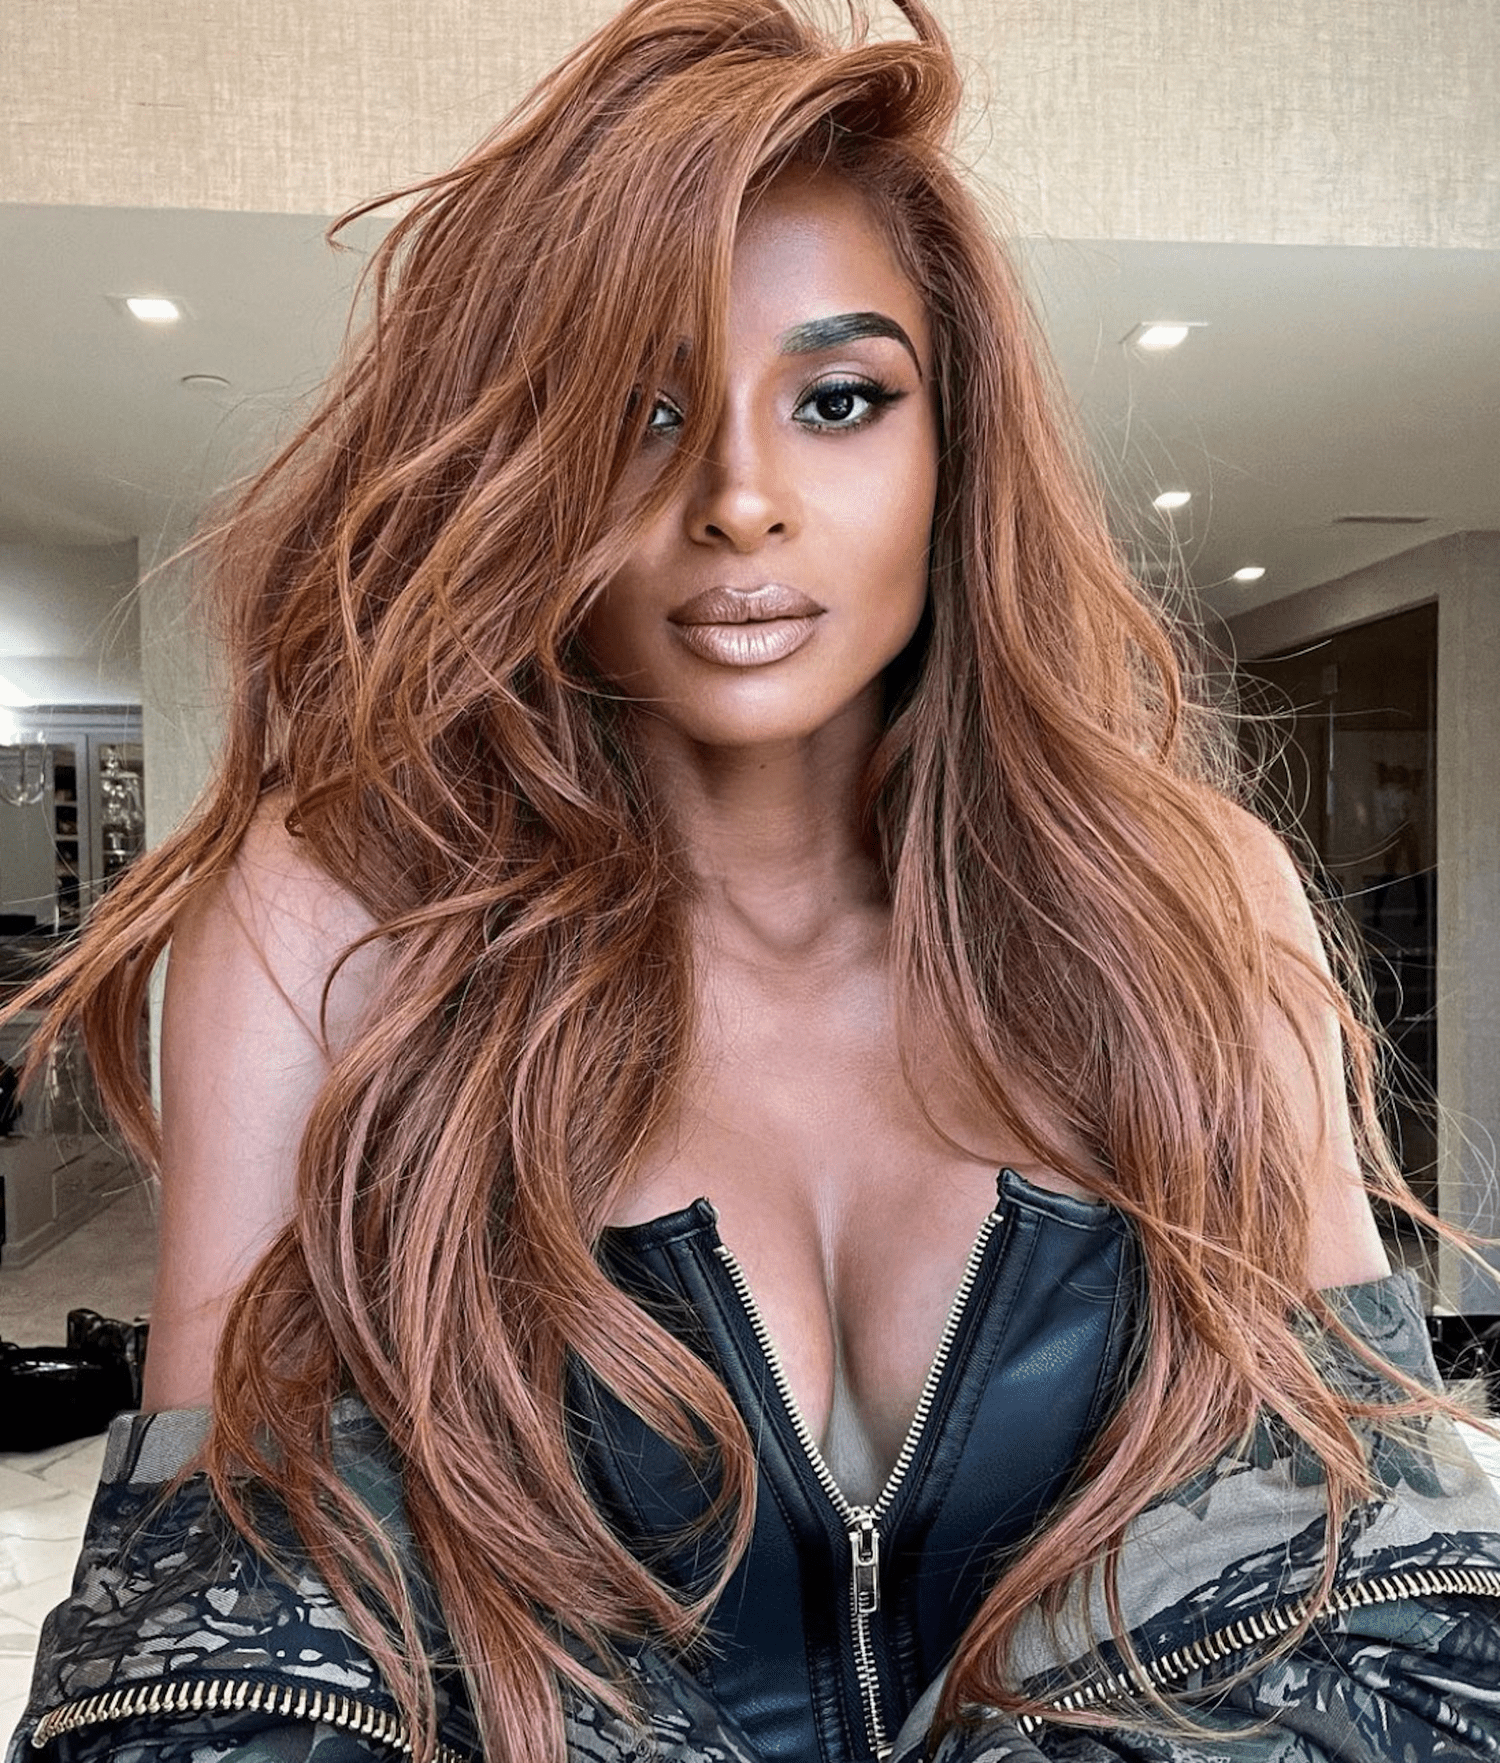 CIARA WEARS A COPPER HAIR COLOR ON LONG TOUSLED STRANDS WITH A VOLUMINOUS SIDE PART